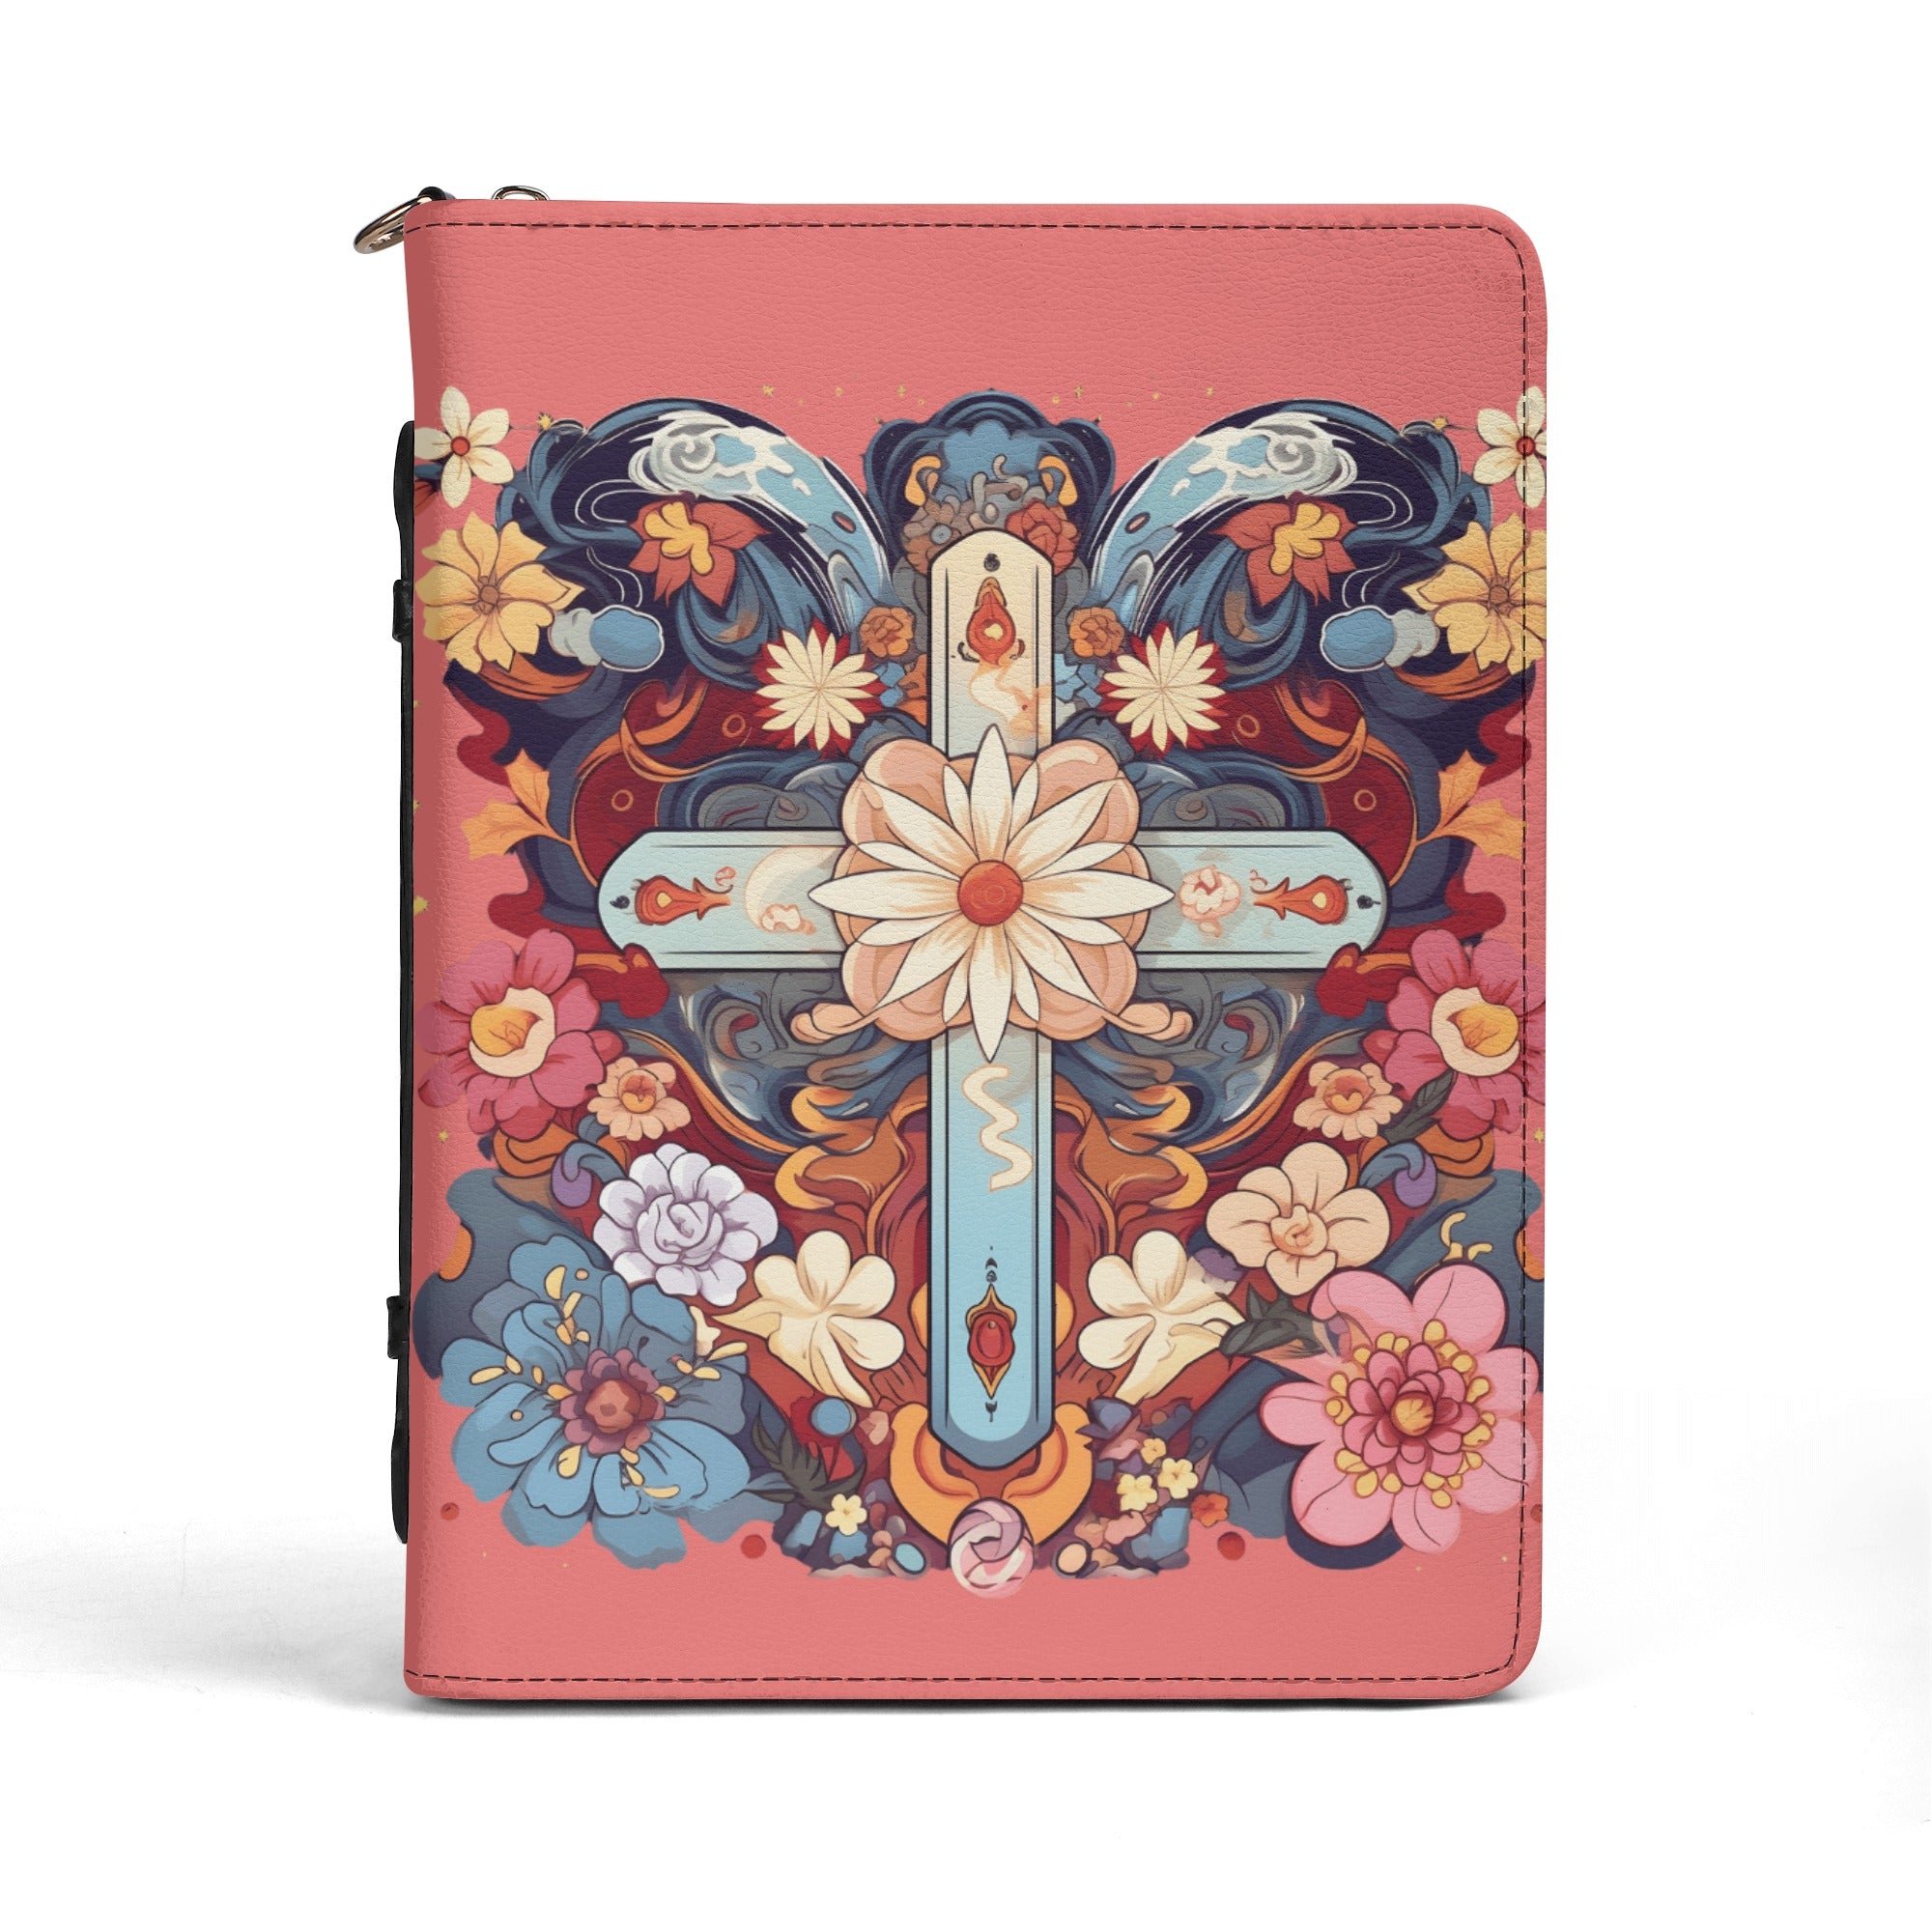 Pink Cross Printed PU Leather Bible Cover With Pocket (M - 2XL)